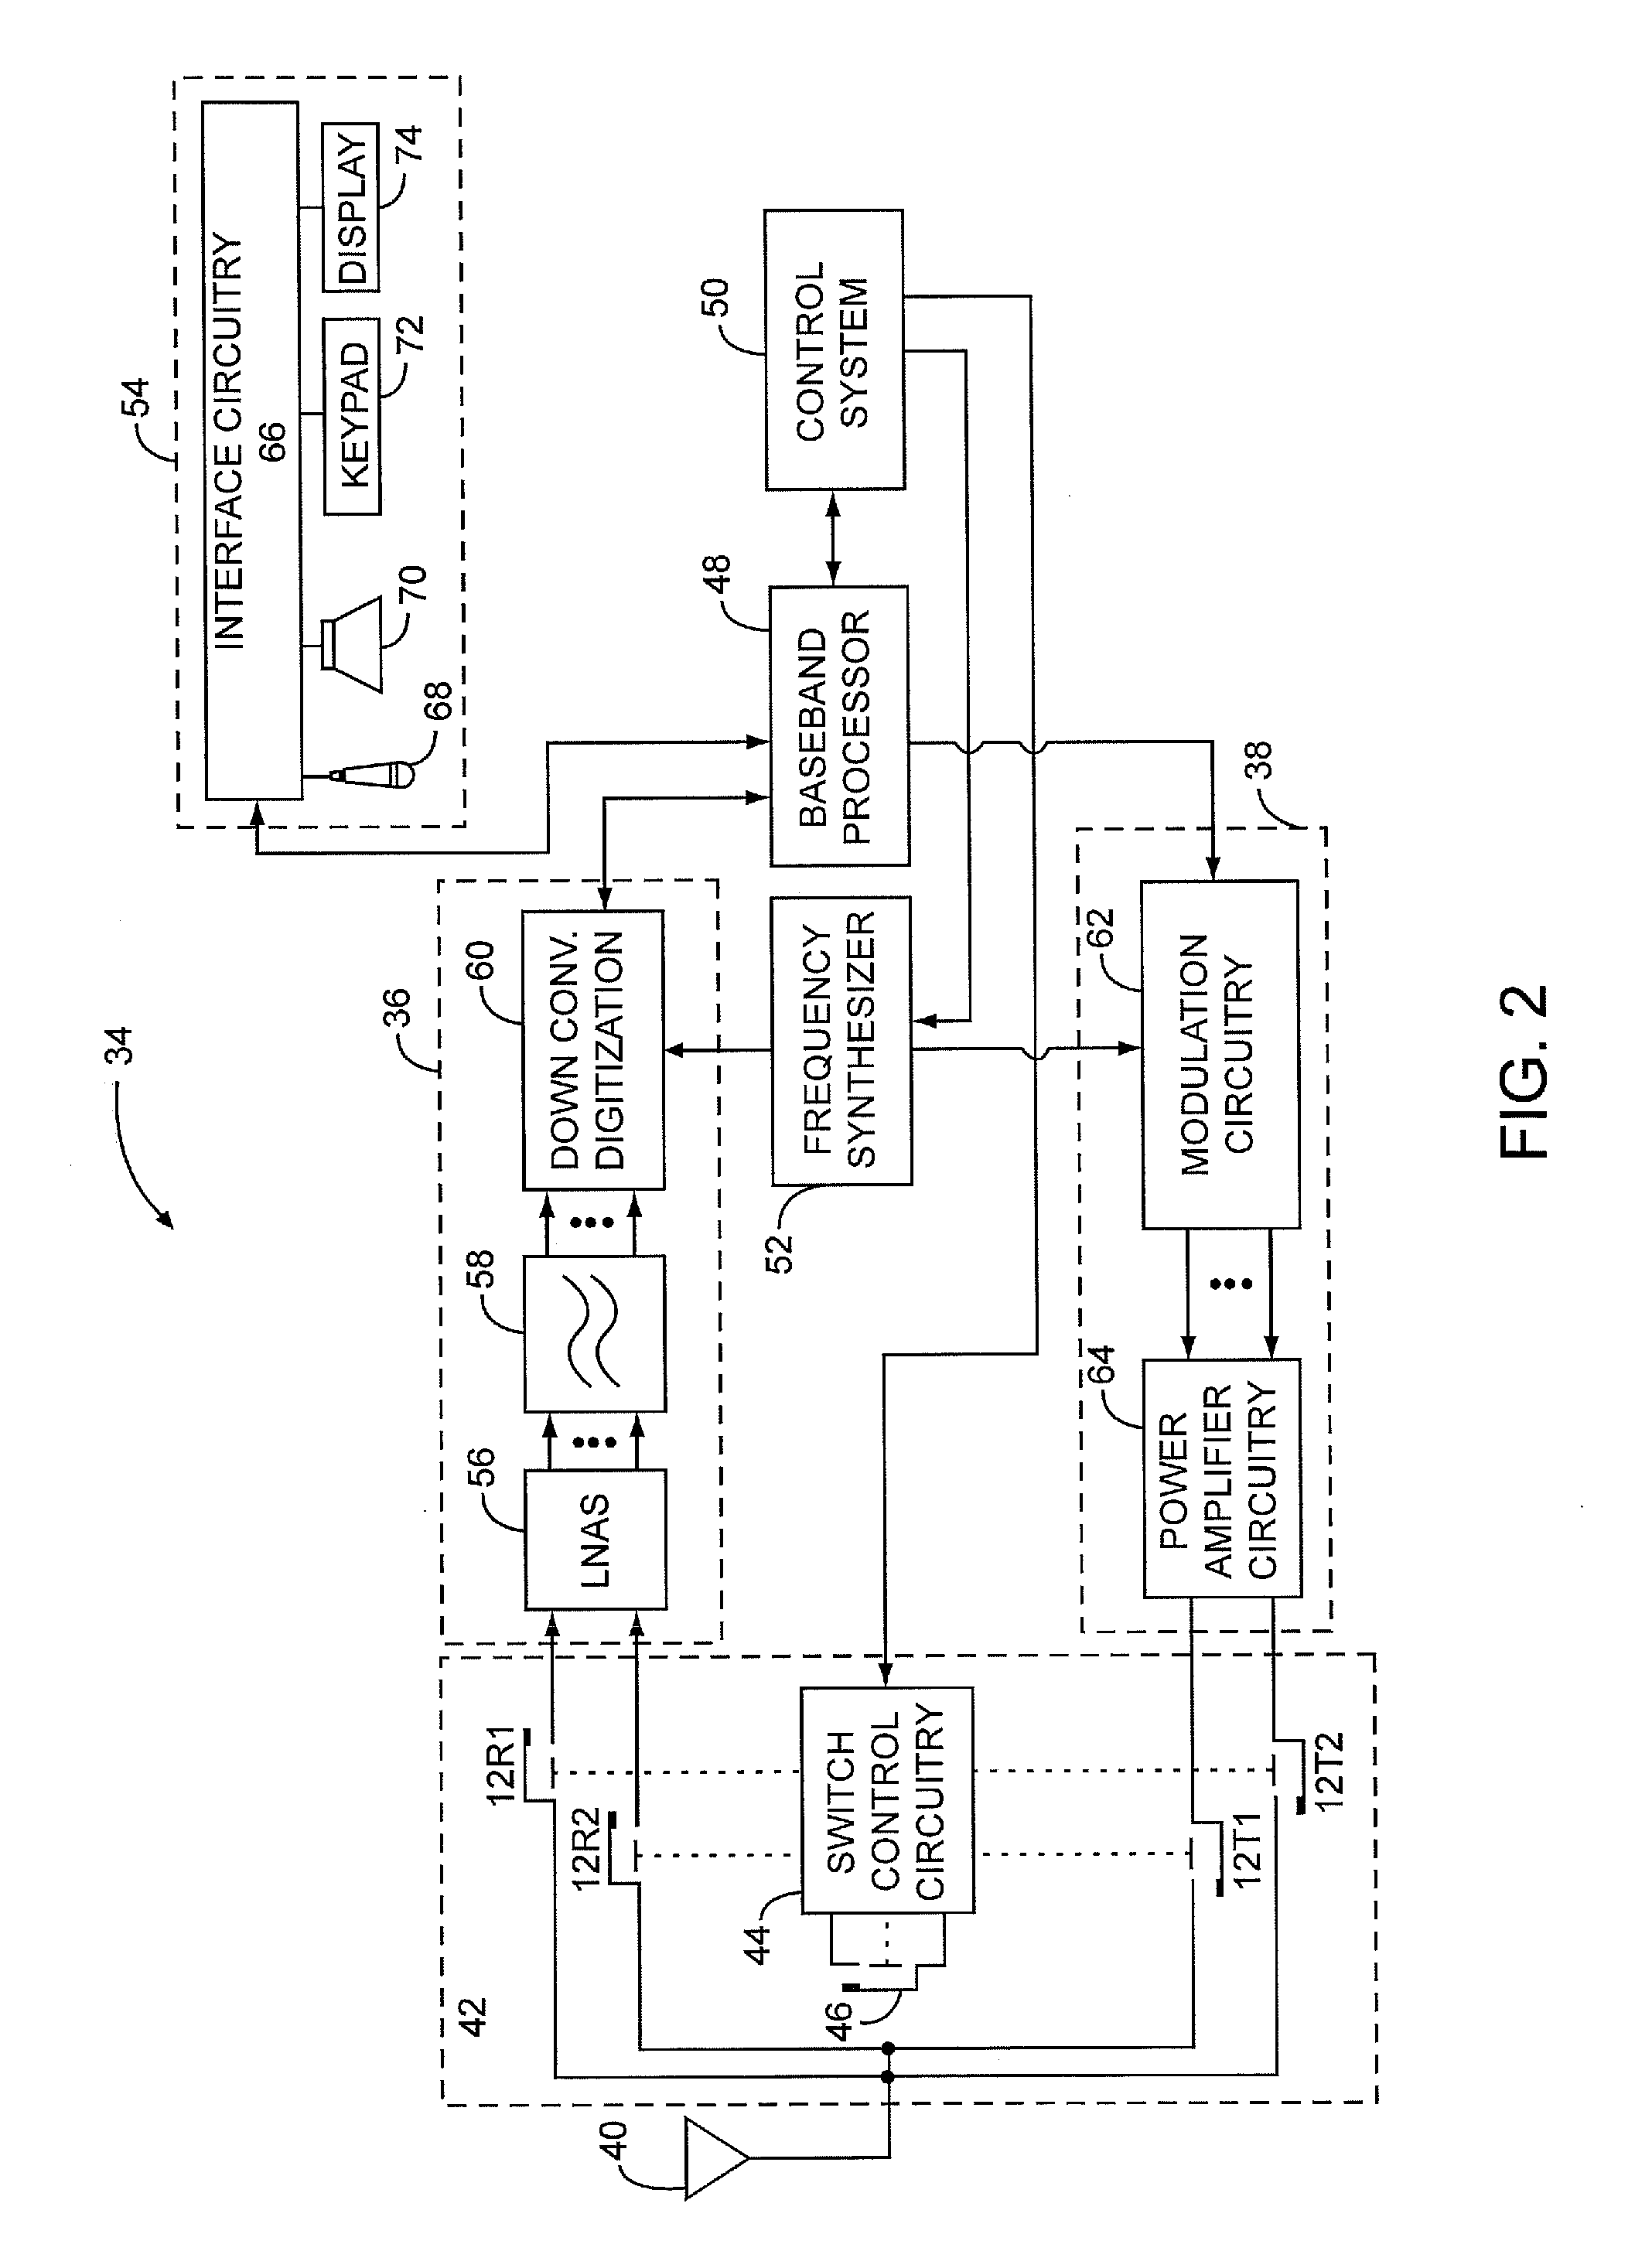 Controlled closing of MEMS switches